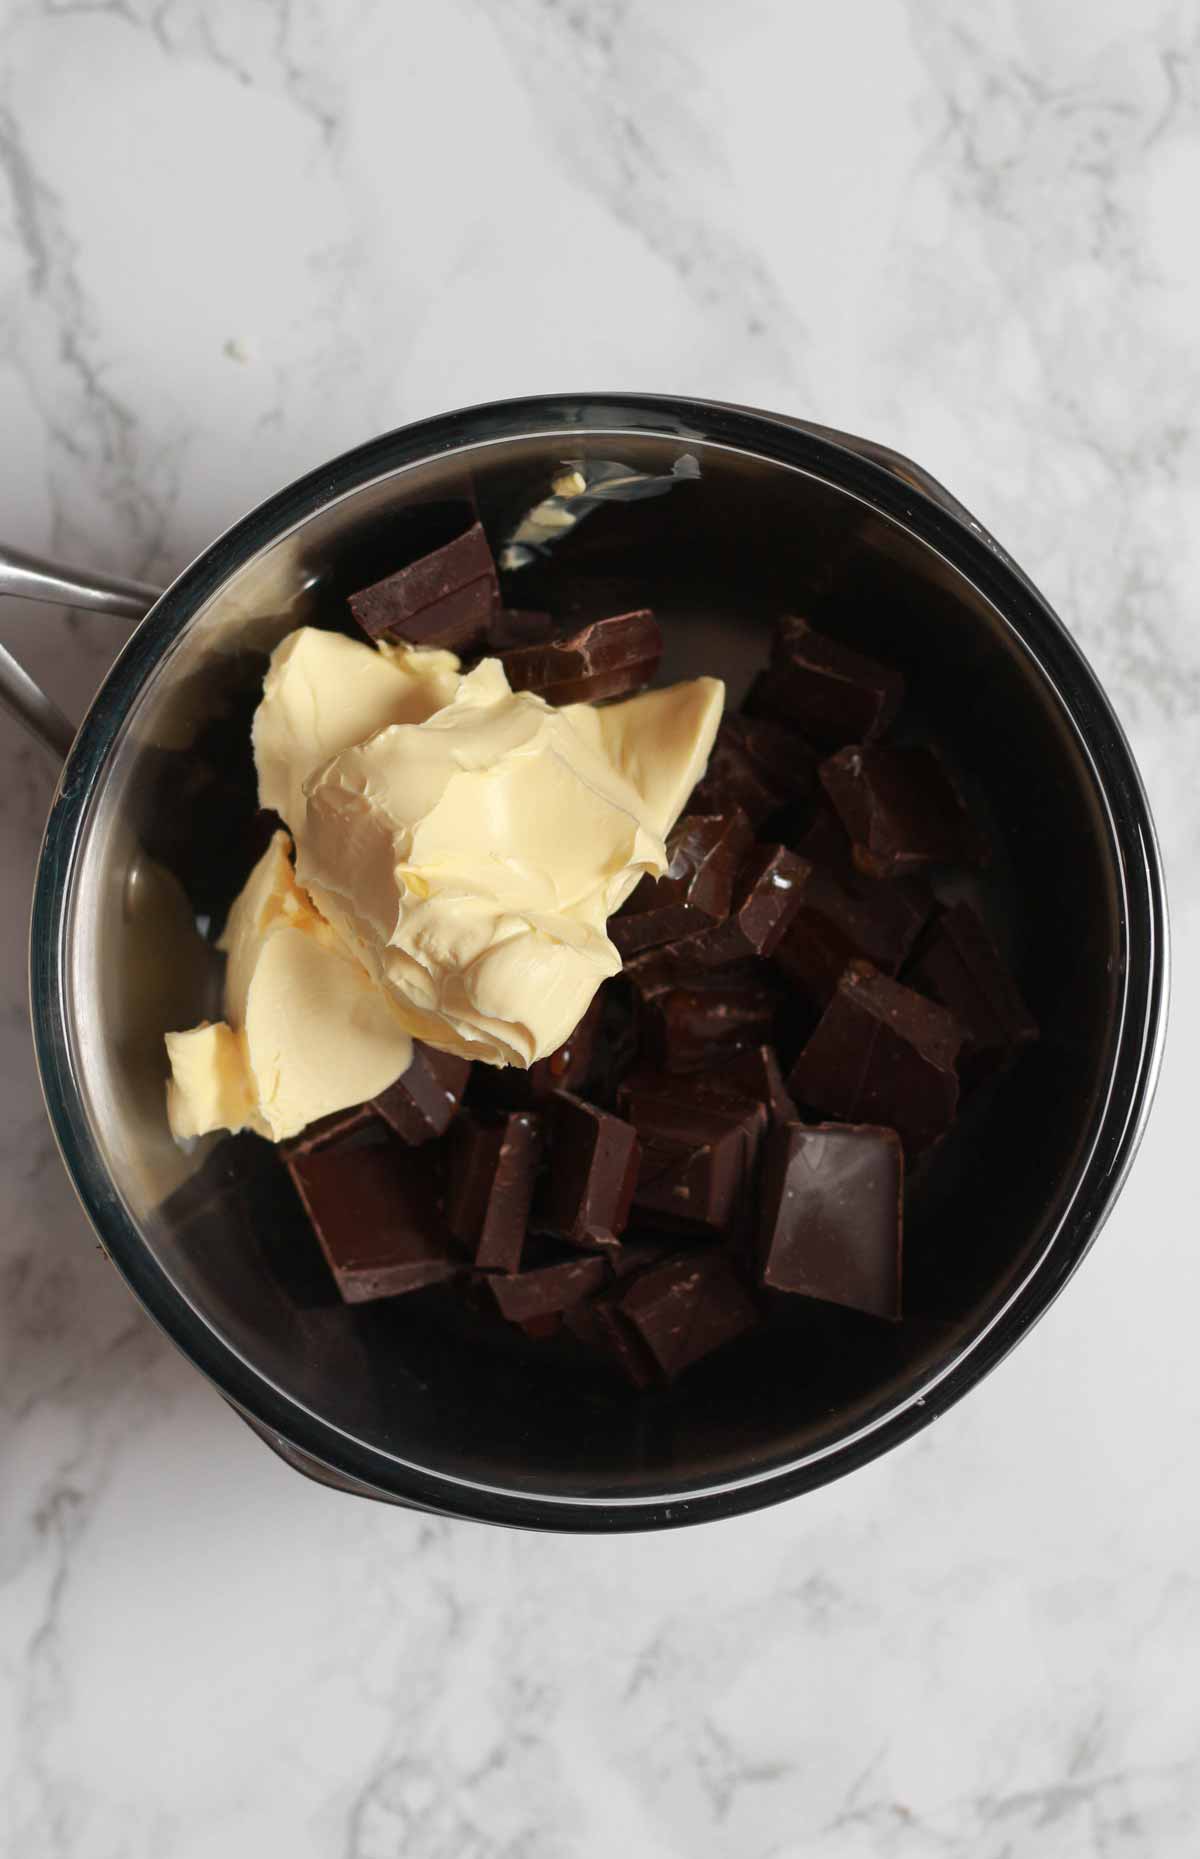 Bowl Of Chocolate And Margarine Over A Pan Of Water